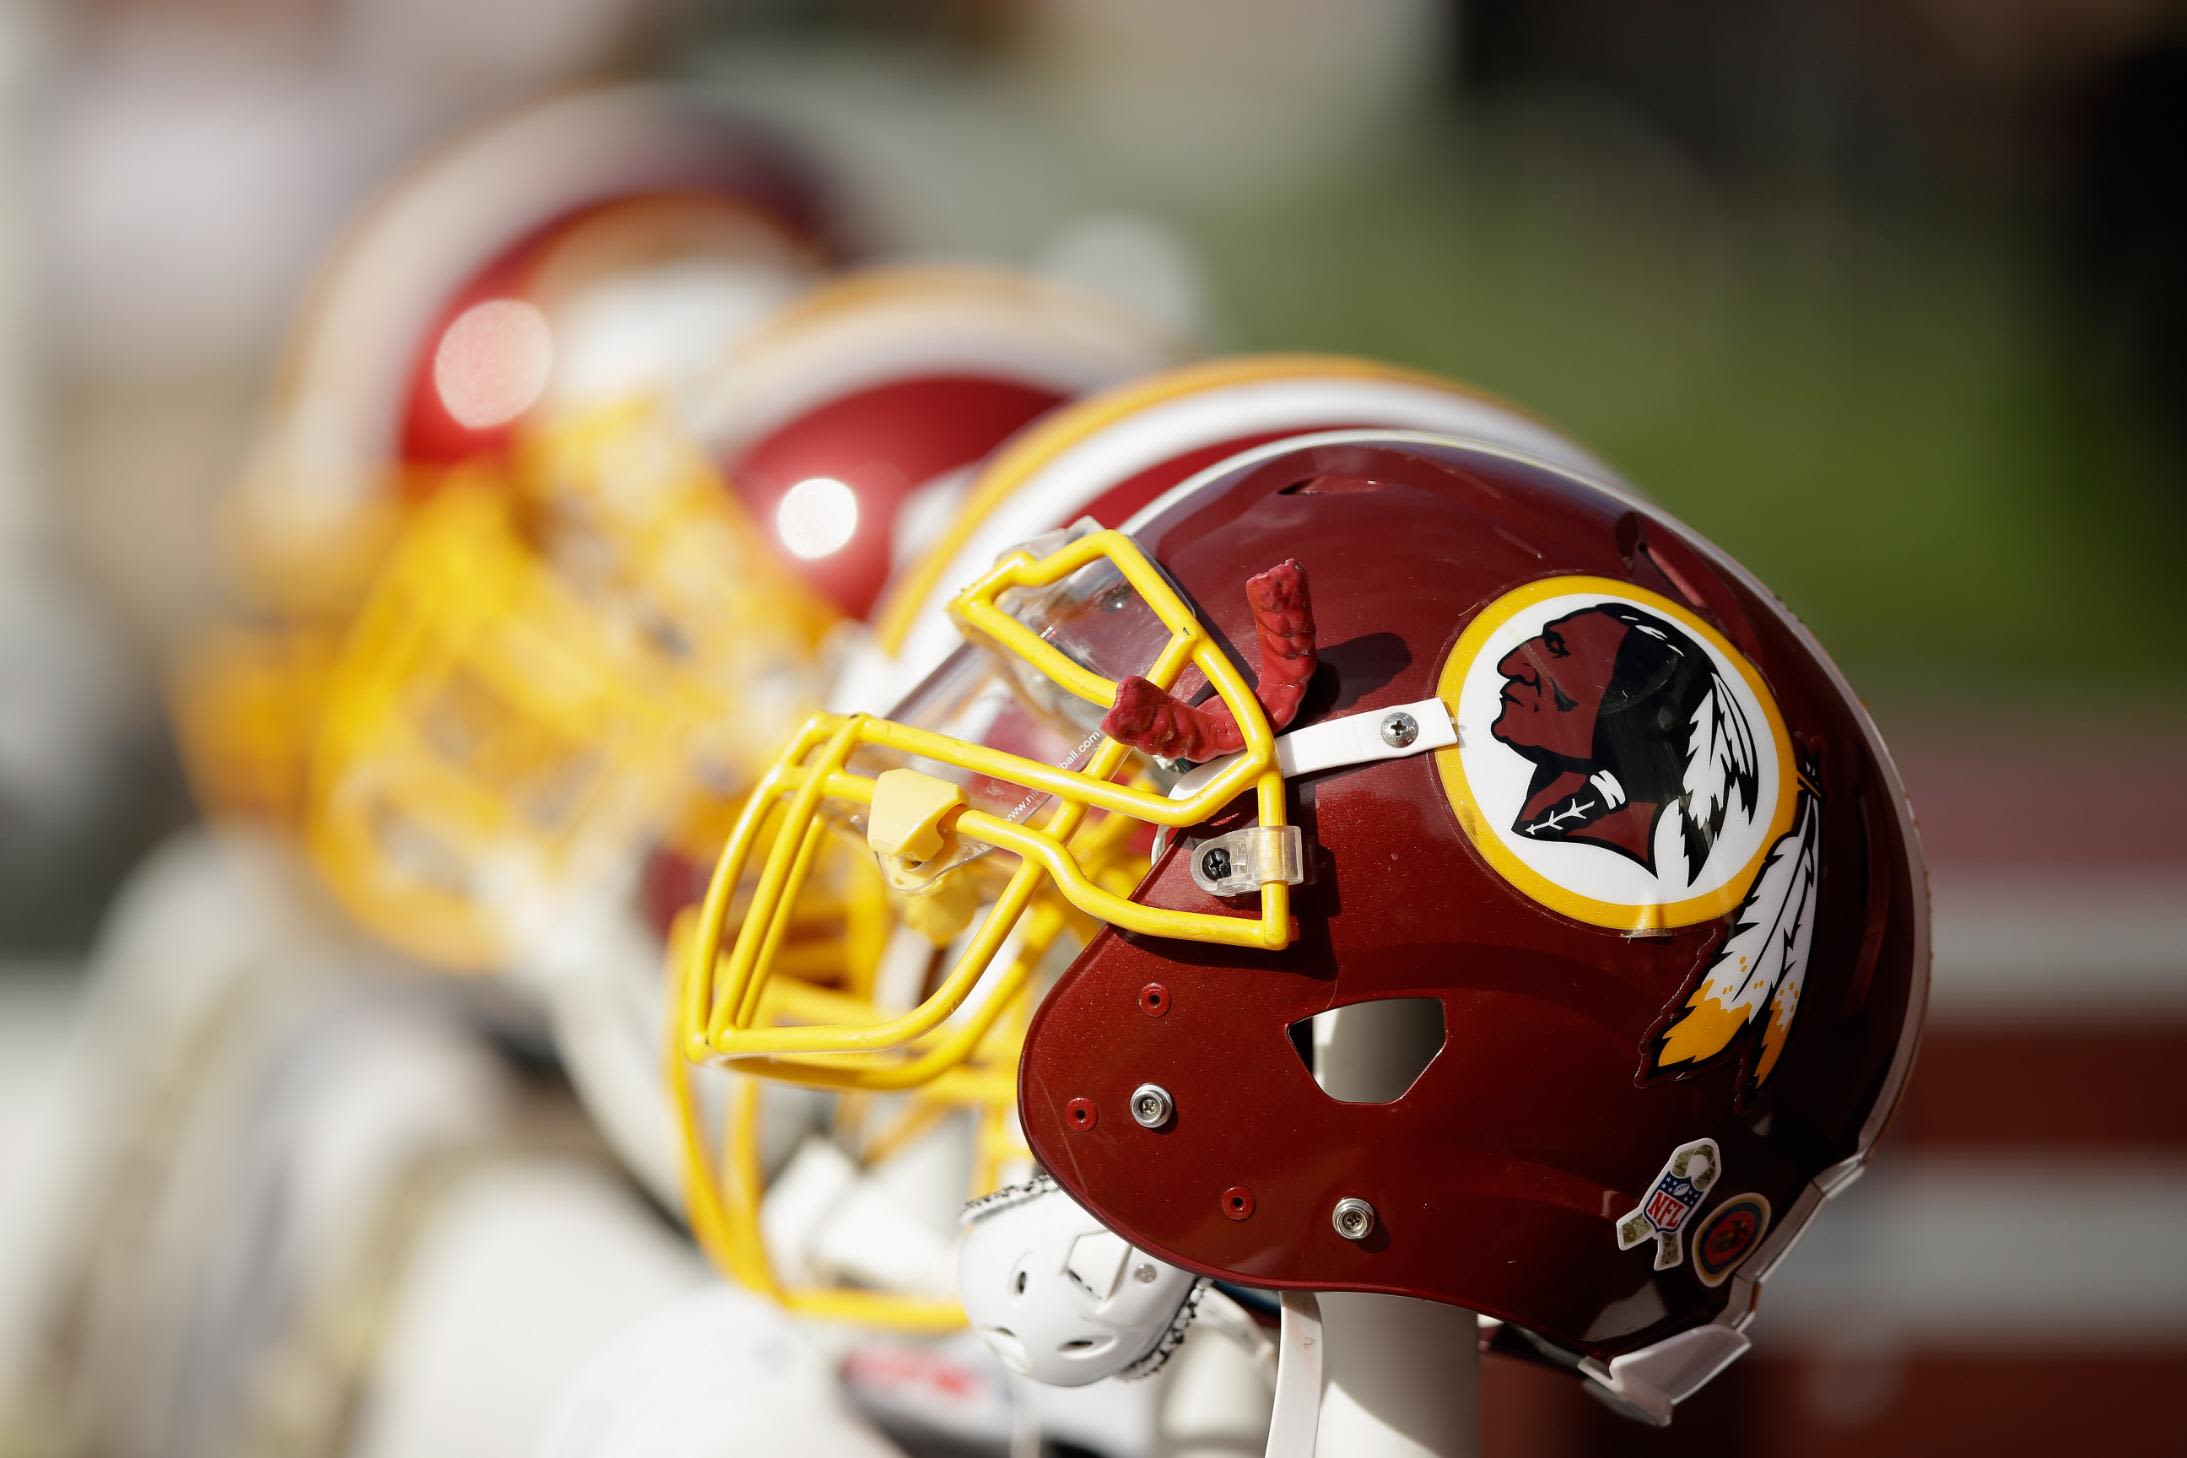 Washington Redskins replacement names trademarked by one man